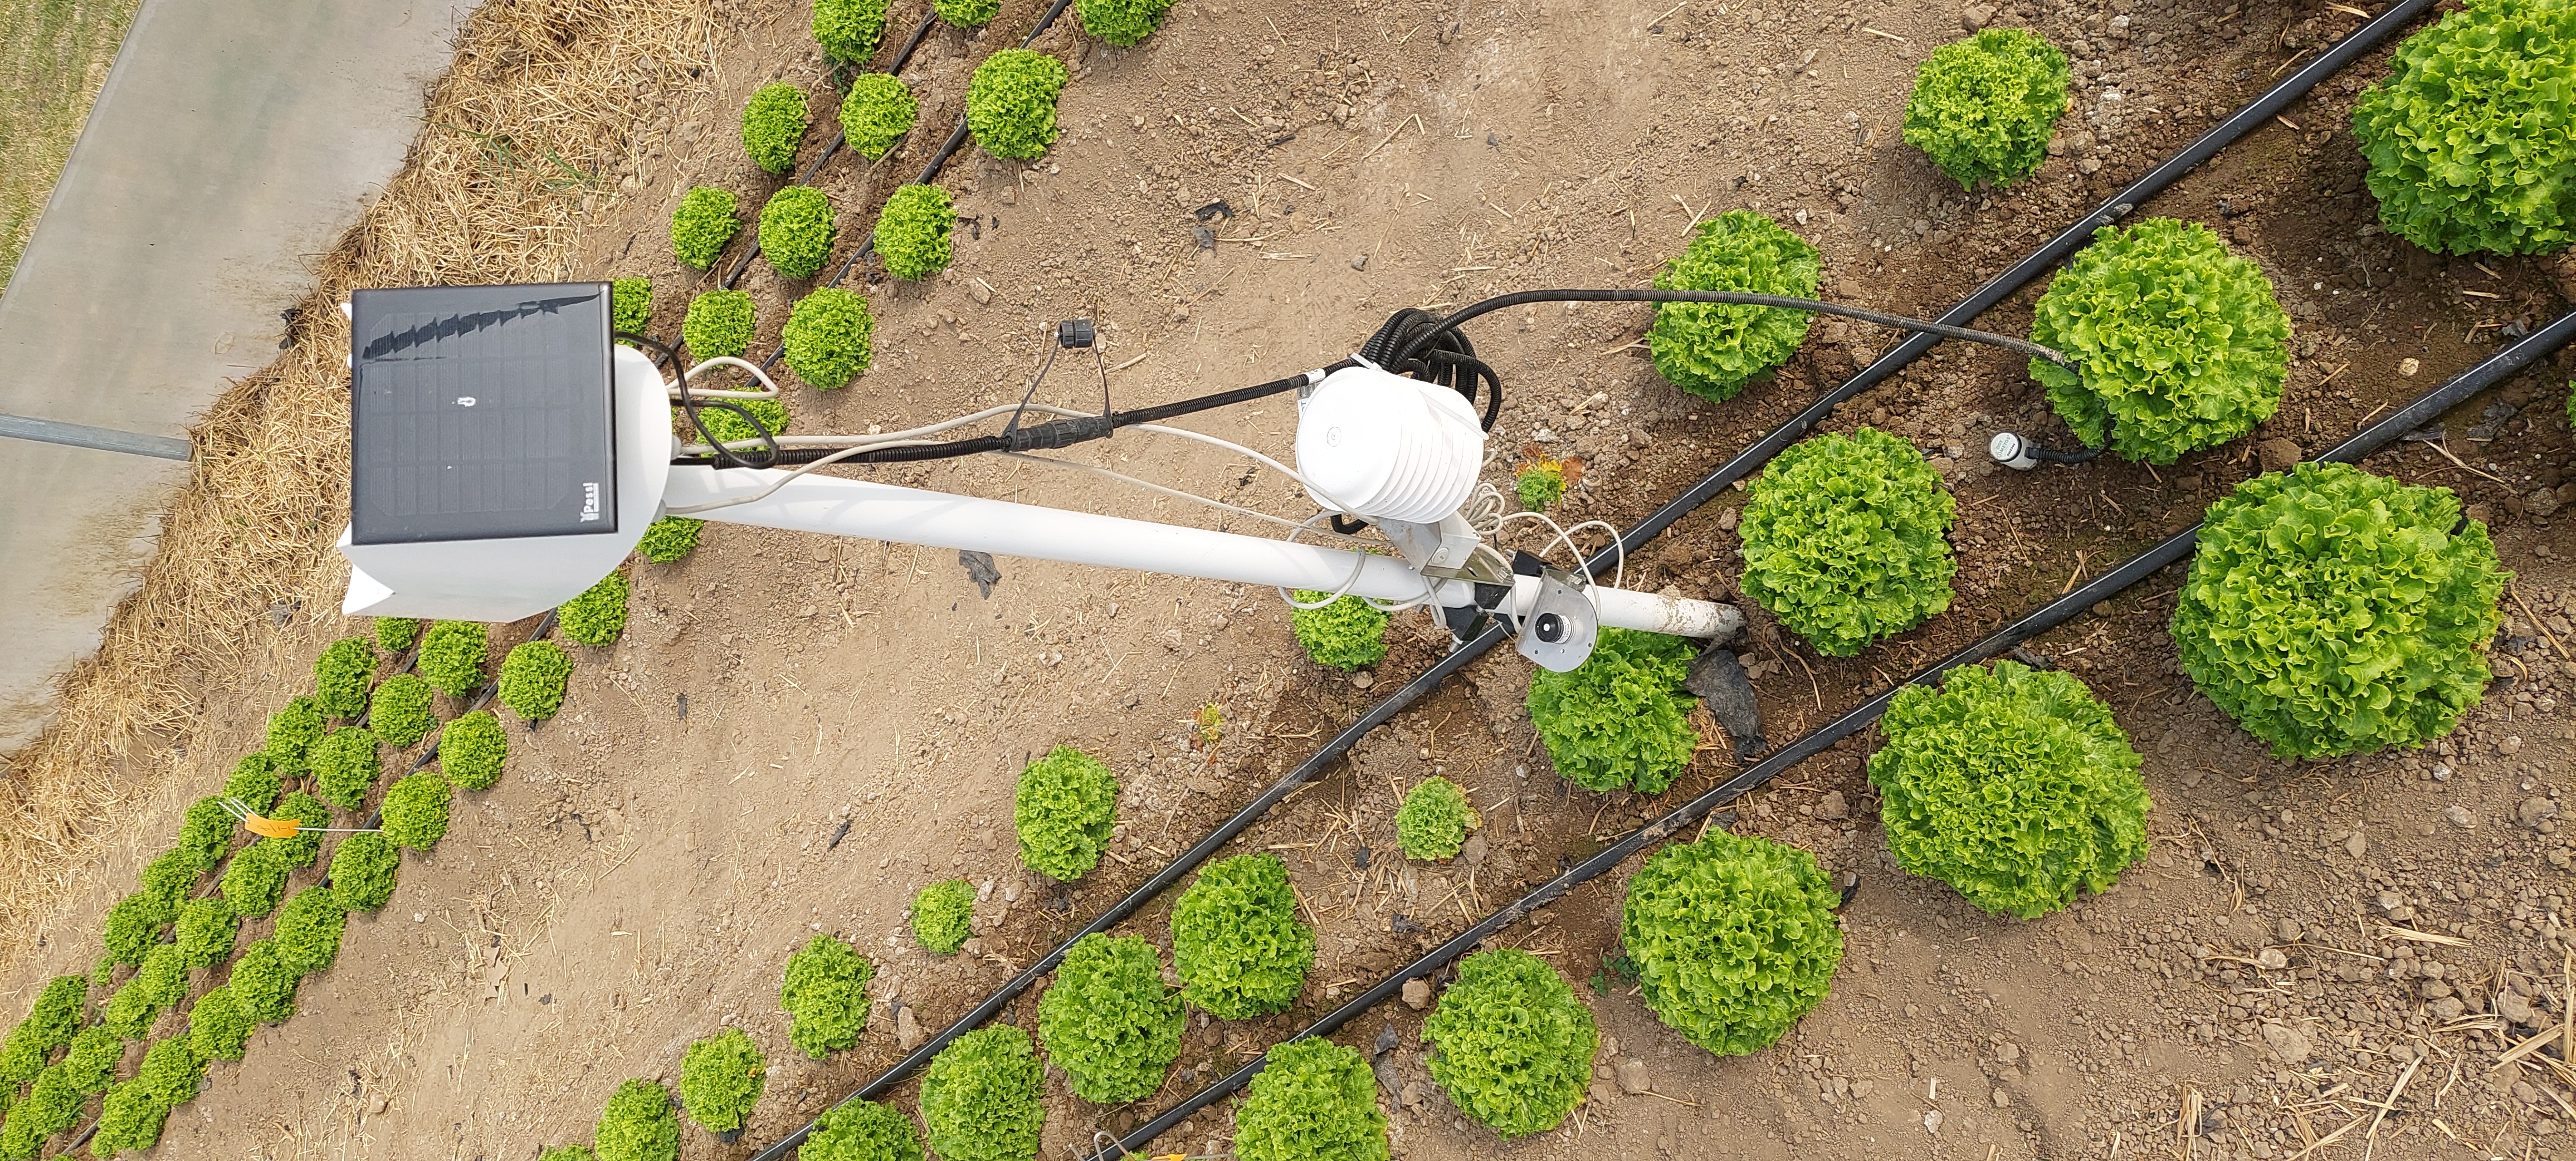 Irrigation, robotics, and the Internet of Things (IoT) are increasingly being used in agriculture to improve efficiency, yield, and sustainabili...